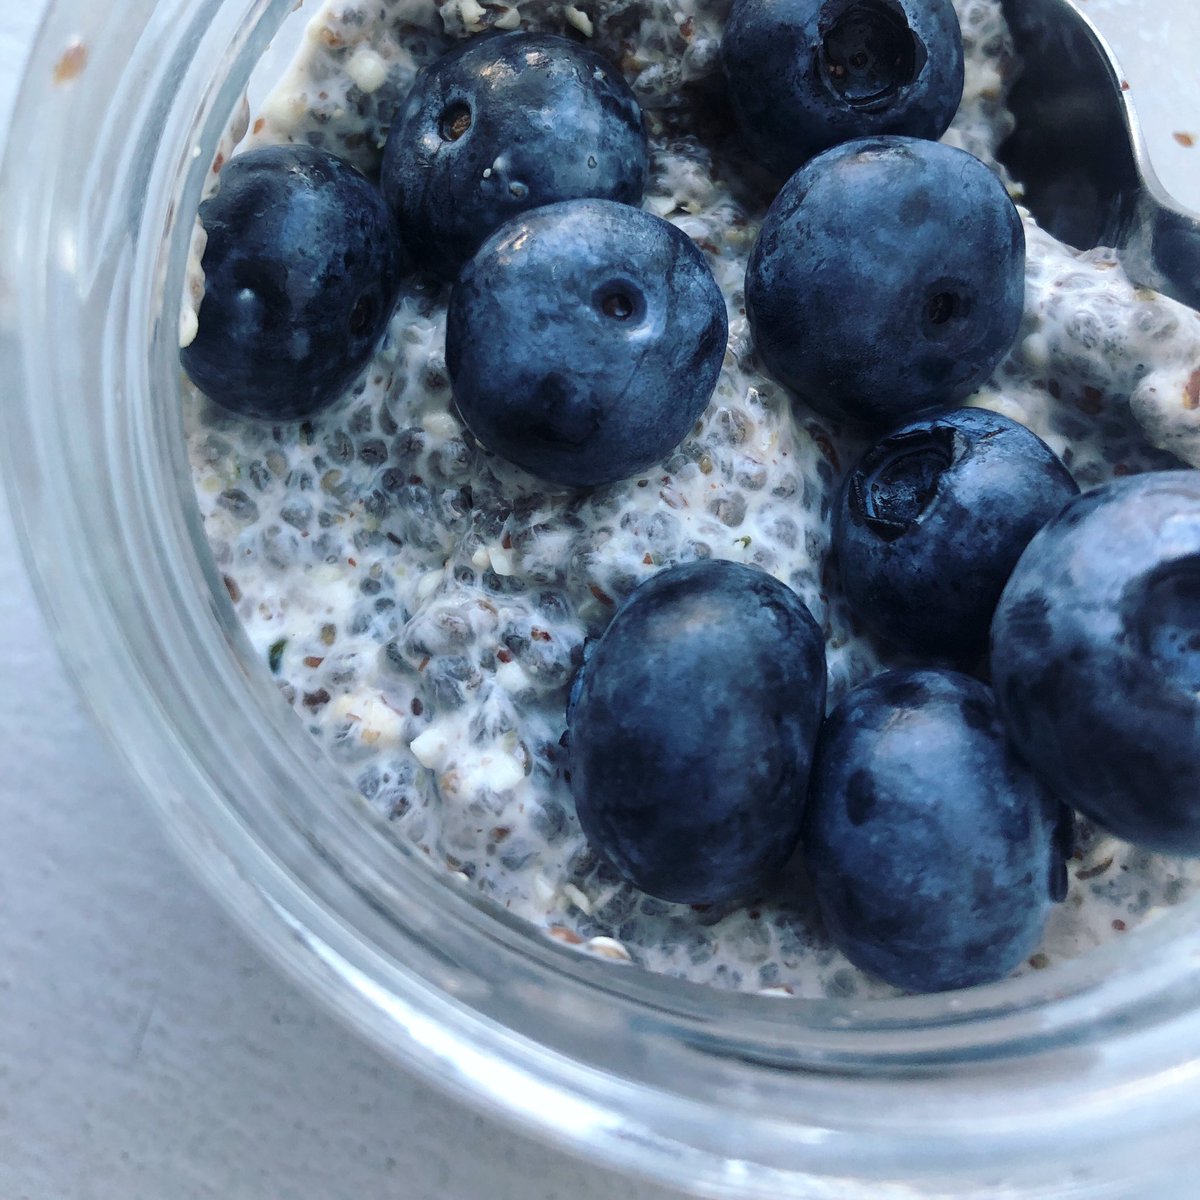 Blueberry chia pudding 💙 3tbsp black chia seeds 1tbsp hulled hemp seeds 1tbsp ground flax 1/2-1 cup of cashew milk Add all ingredients to a jar and mix. Let sit in the fridge for 2 hours.Add a splash of milk when ready to eat and top with fresh berries and nut butter 😋